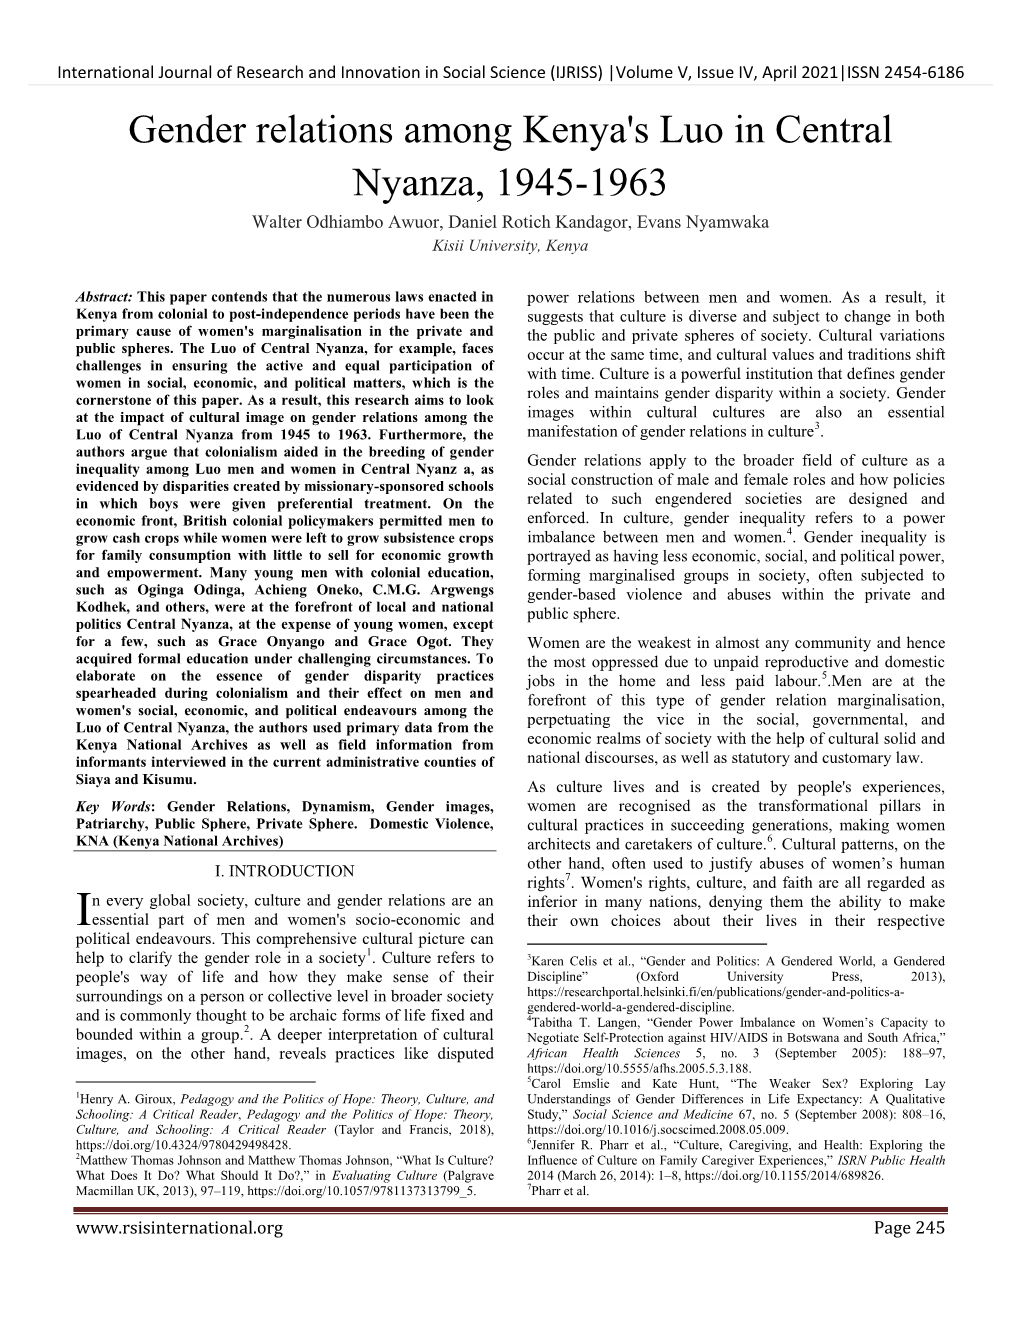 Gender Relations Among Kenya's Luo in Central Nyanza, 1945-1963